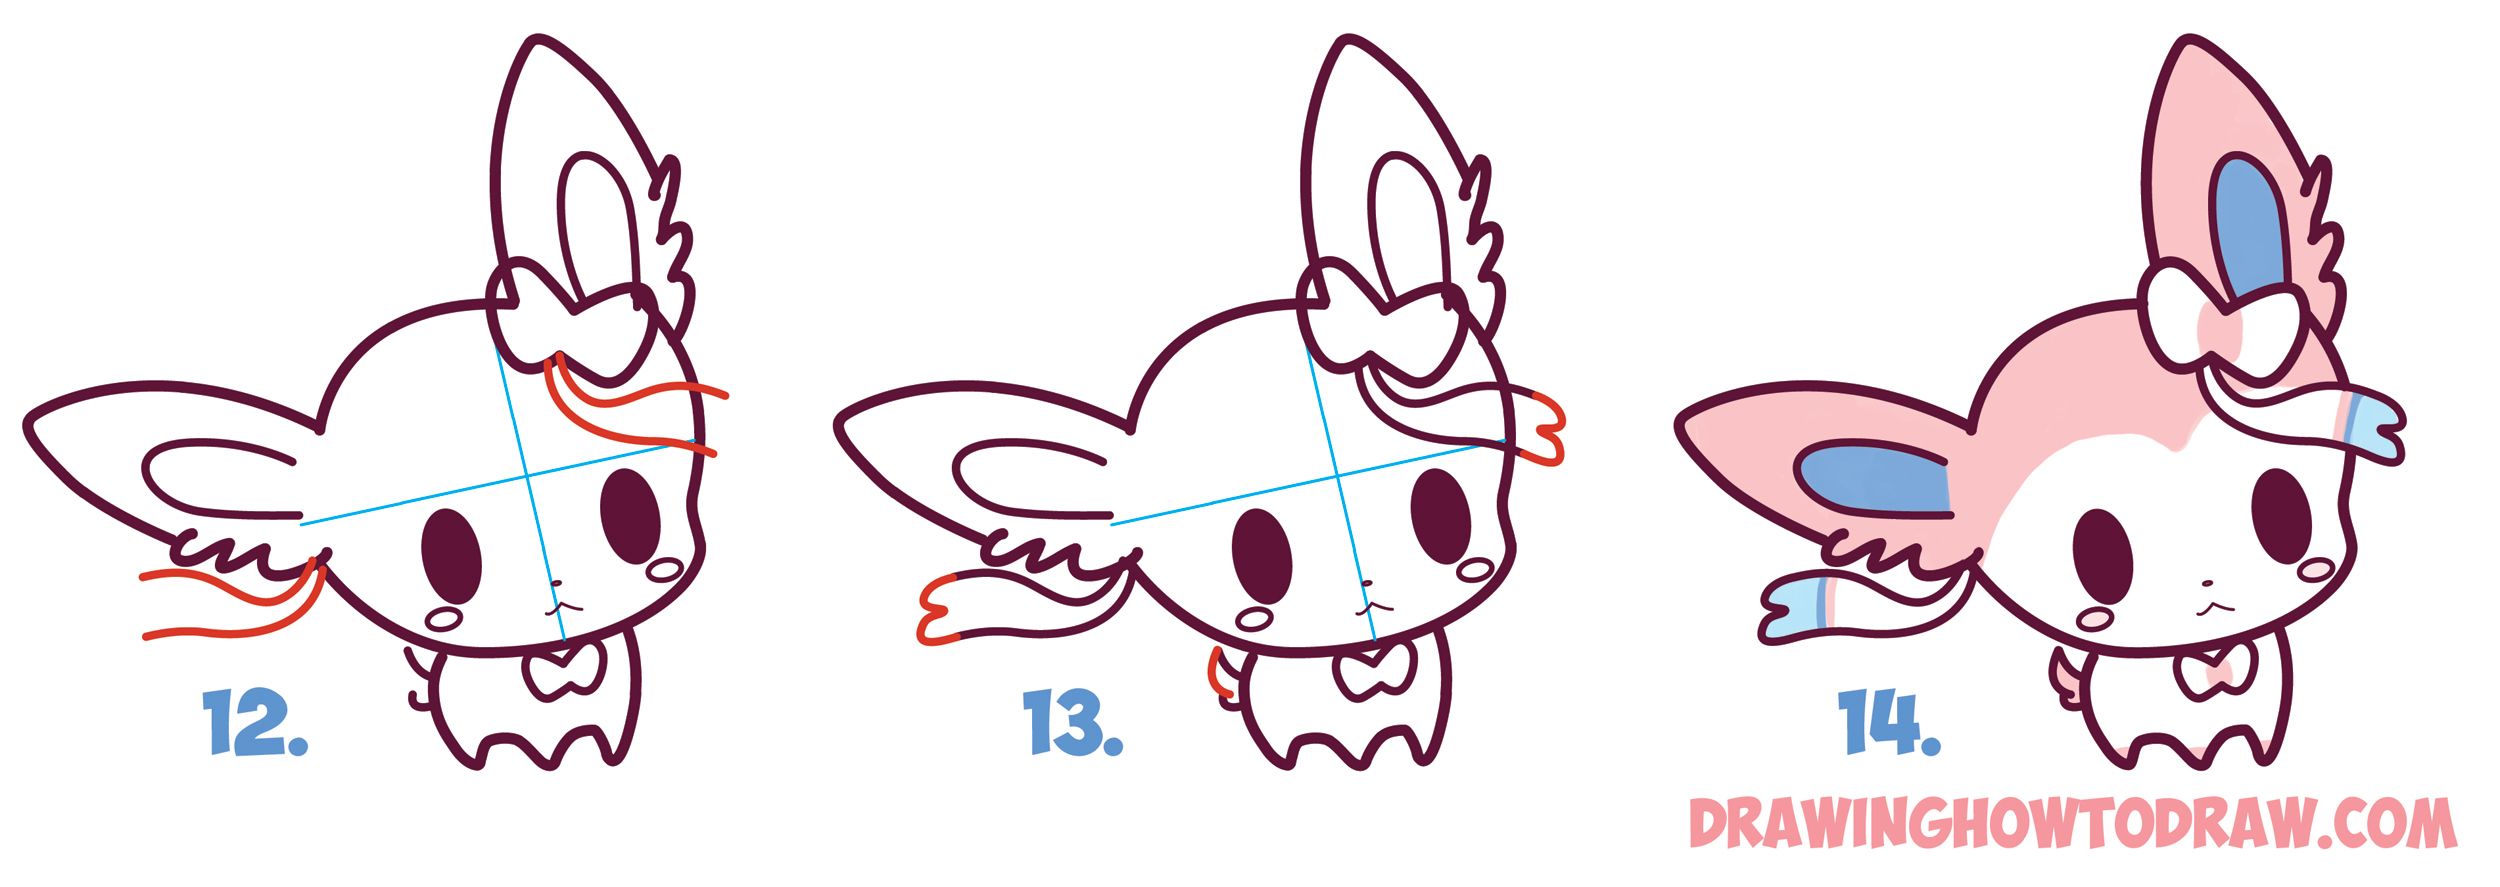 How To Draw Cute Chibi Kawaii Sylveon From Pokemon - Draw Pokemon Sylveon Step By Step - HD Wallpaper 